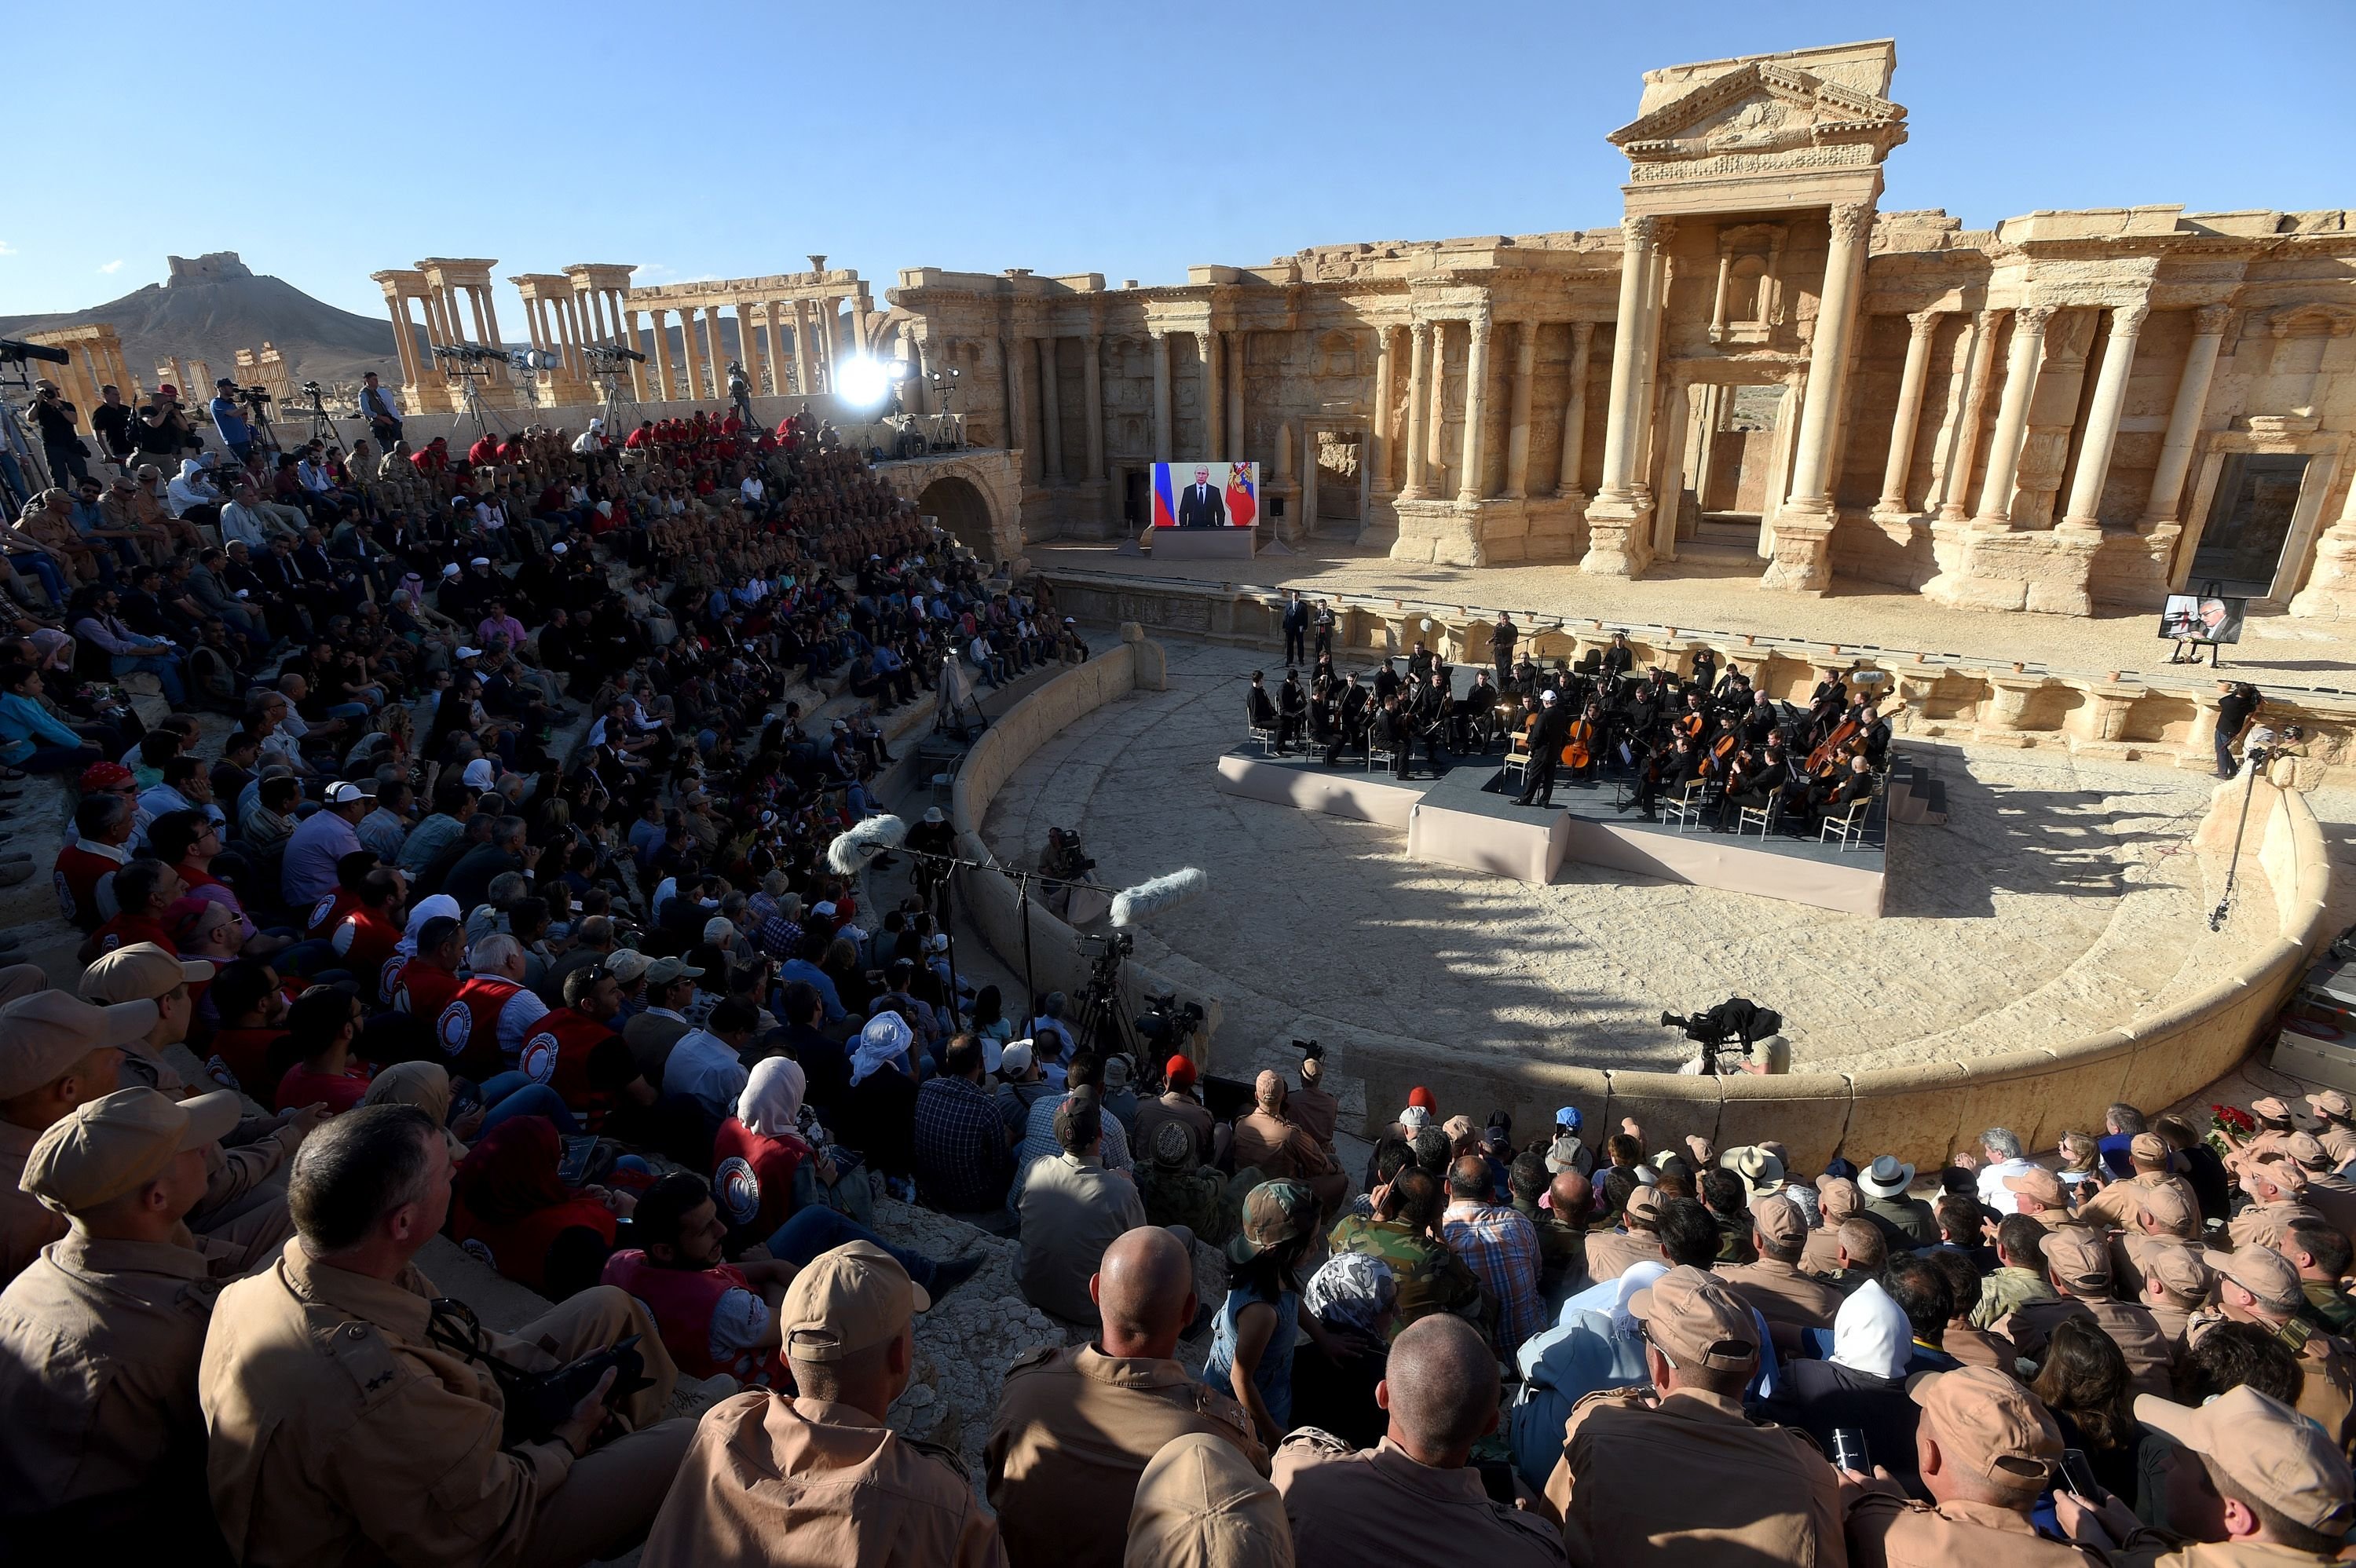 Russian conductor Valery Gergiev leads a concert by the Mariinsky Theater Orchestra in the amphitheatre of the ancient city of Palmyra on May 5, 2016. (Vasily Maxmimov—AFP/Getty Images)